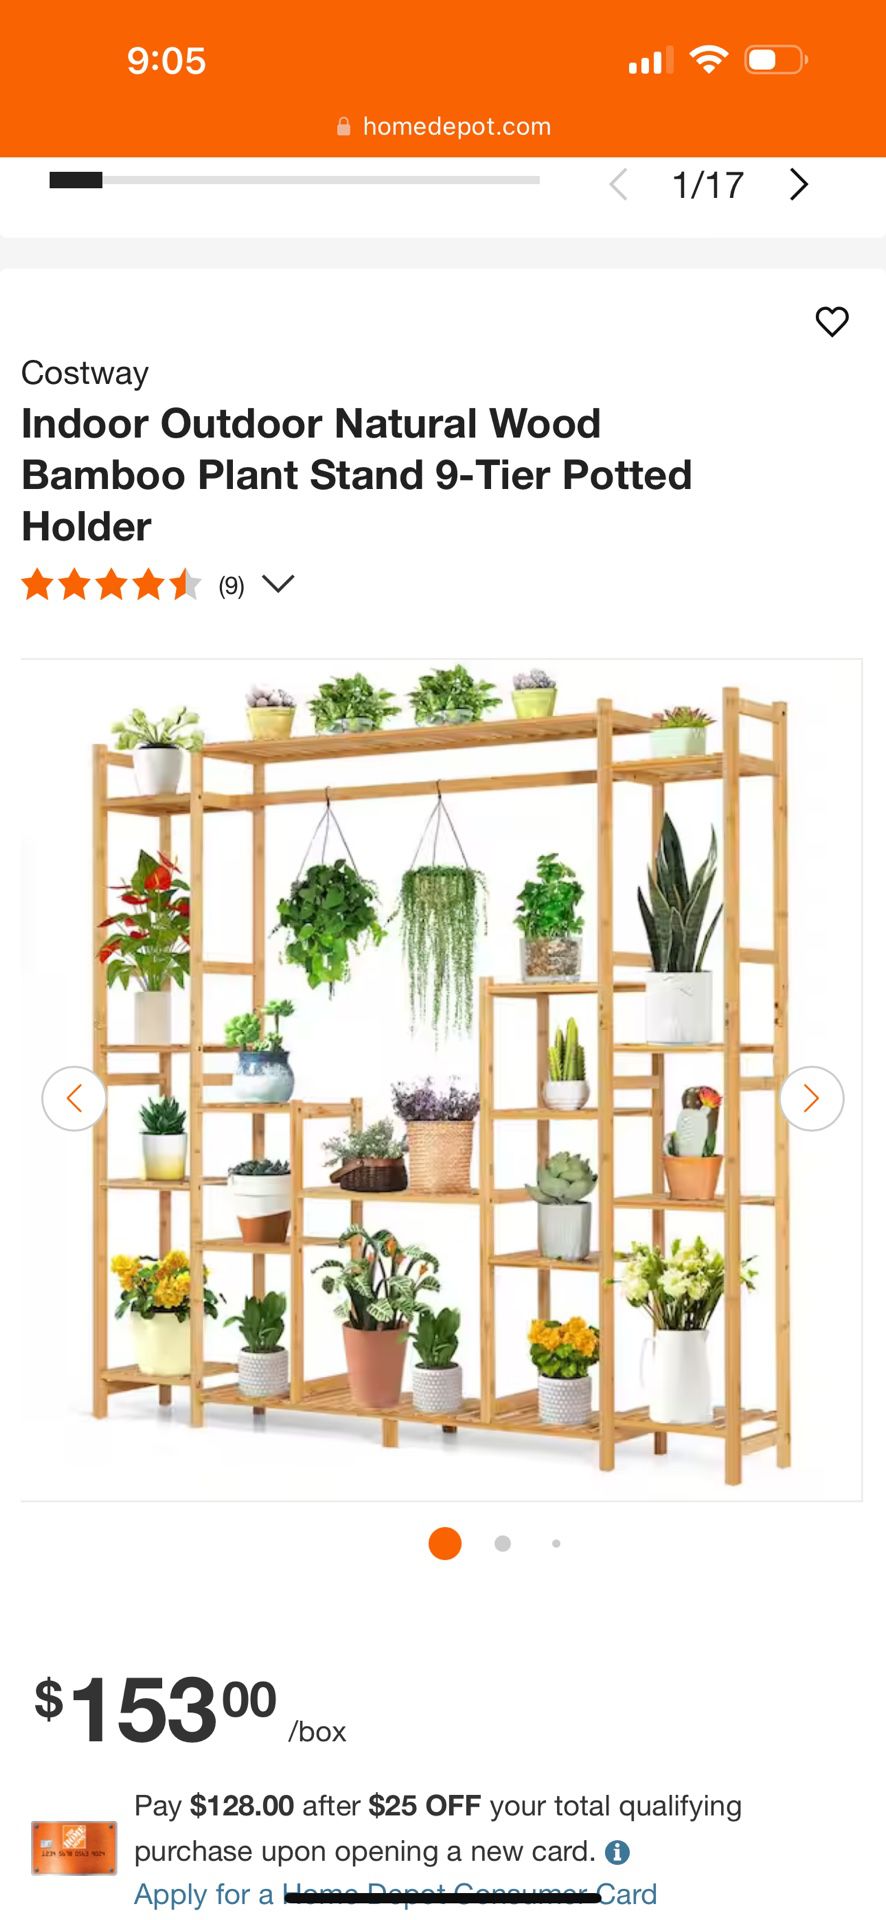 Plant Stand / Shelves